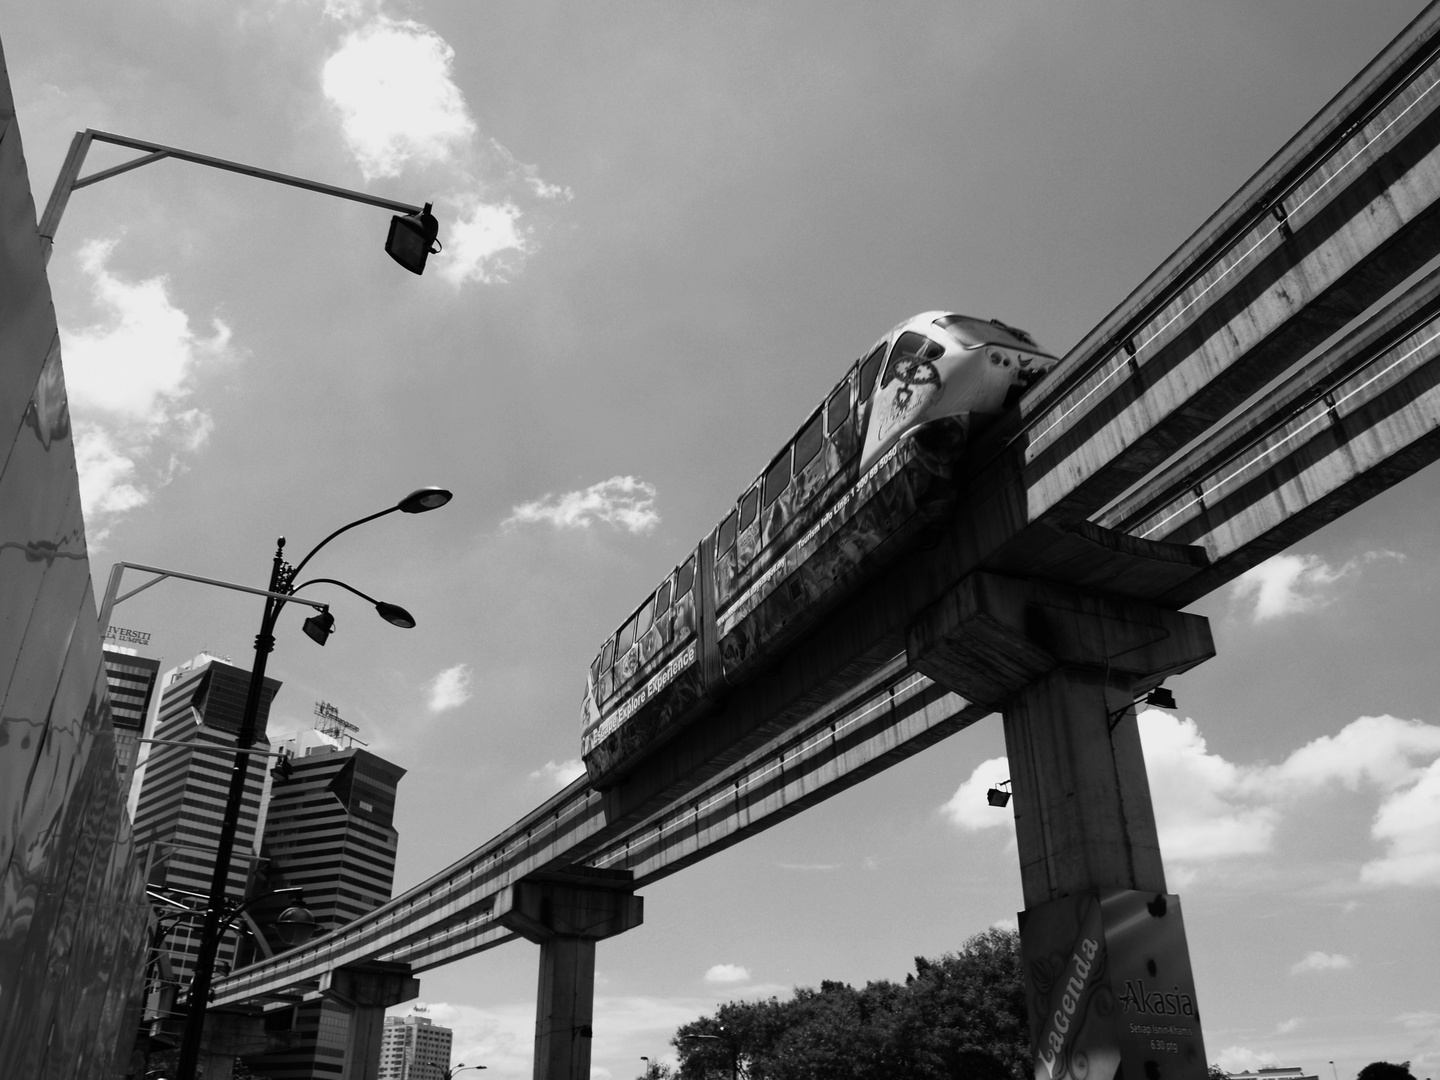 Monorail In KL